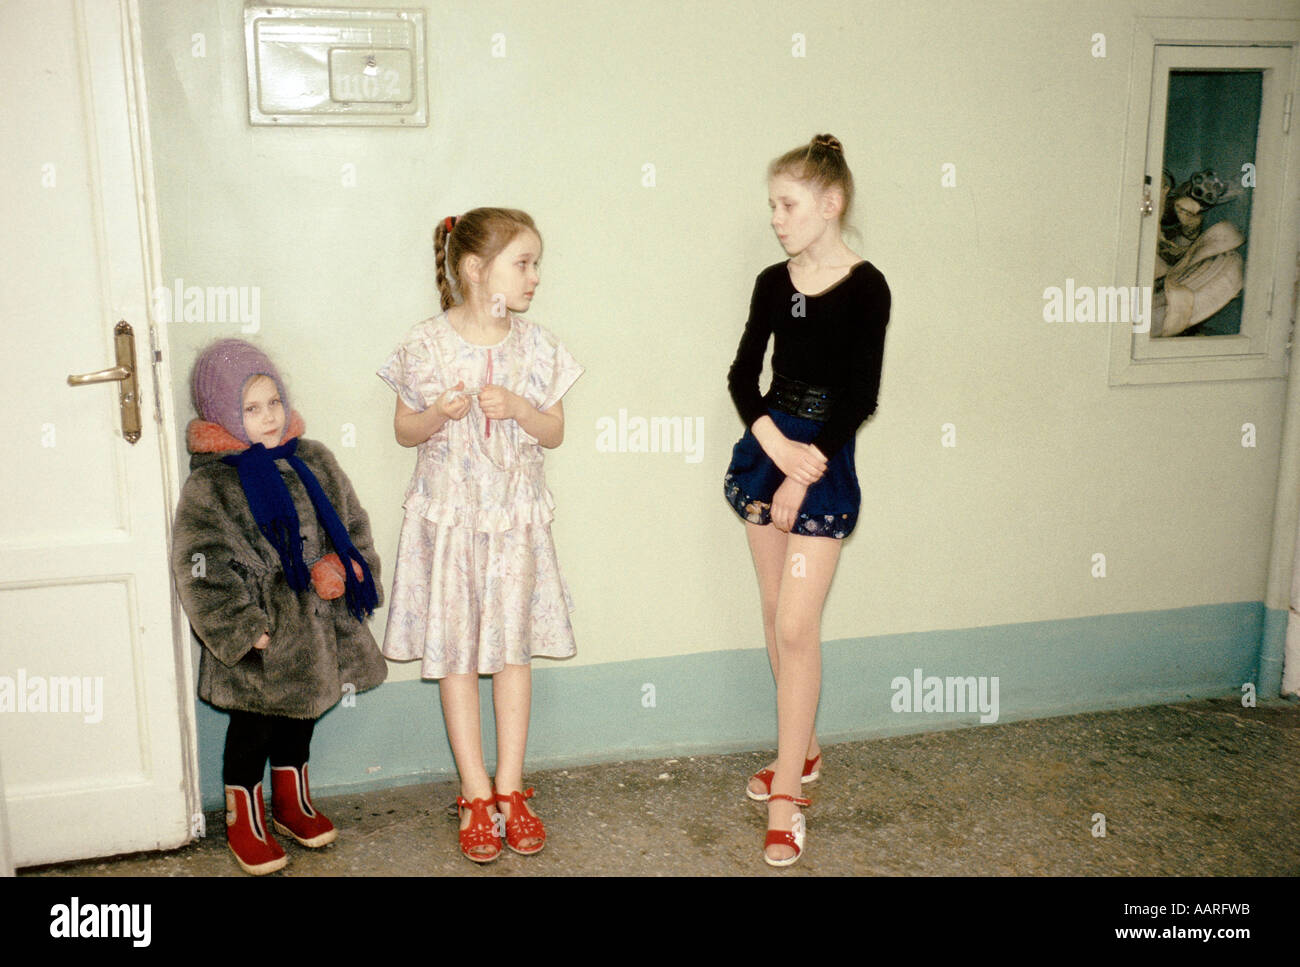 SVERDLOVSK MARCH 1991 YOUNG GIRLS DRESSED UP FOR PARTY  Stock Photo